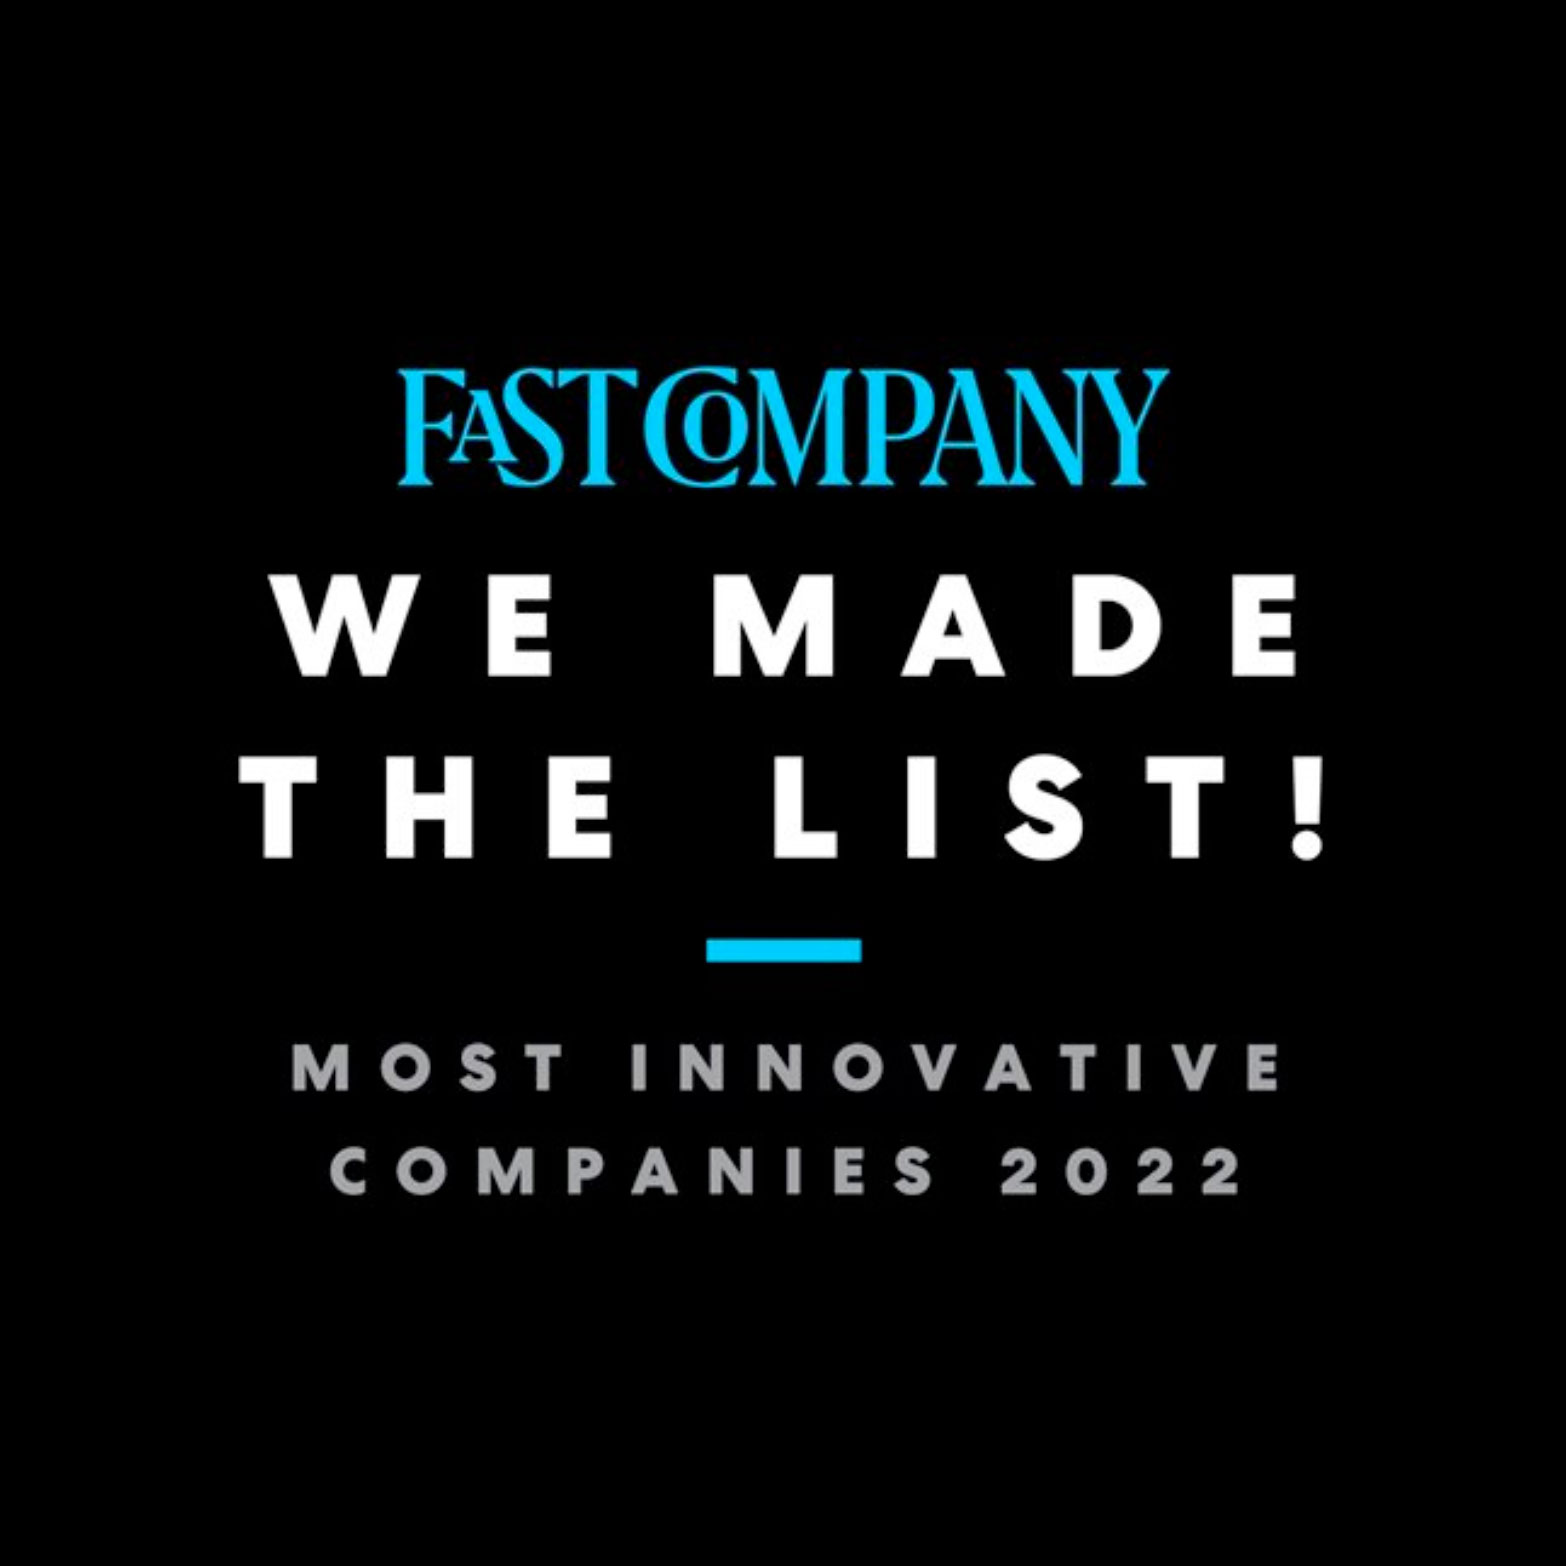 AMERICAN CONNECTION PROJECT ON WORLD’S 50 MOST INNOVATIVE COMPANIES LIST